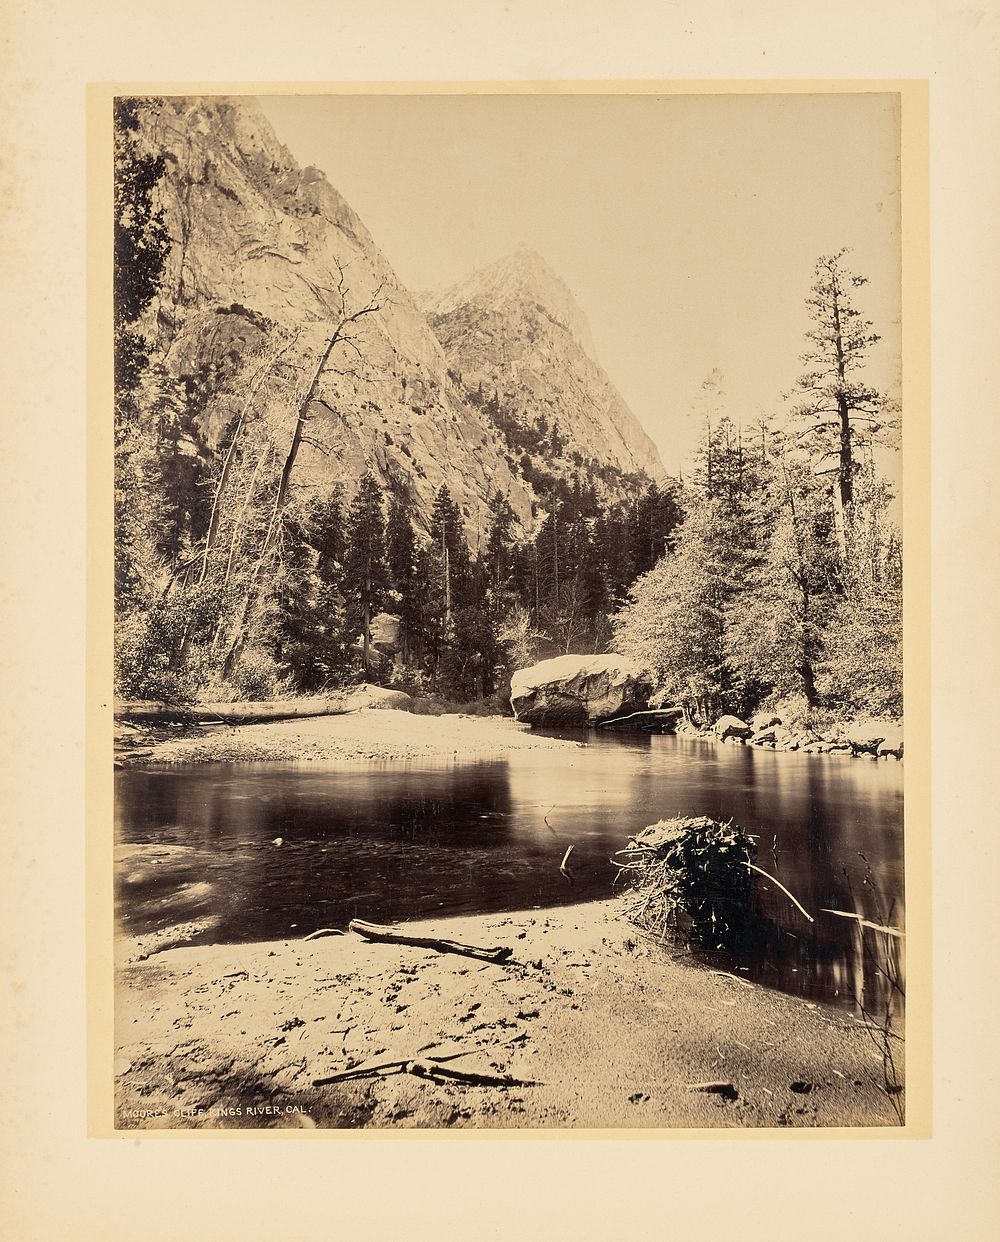 Moore's Cliff, King's River, California by John K Hillers